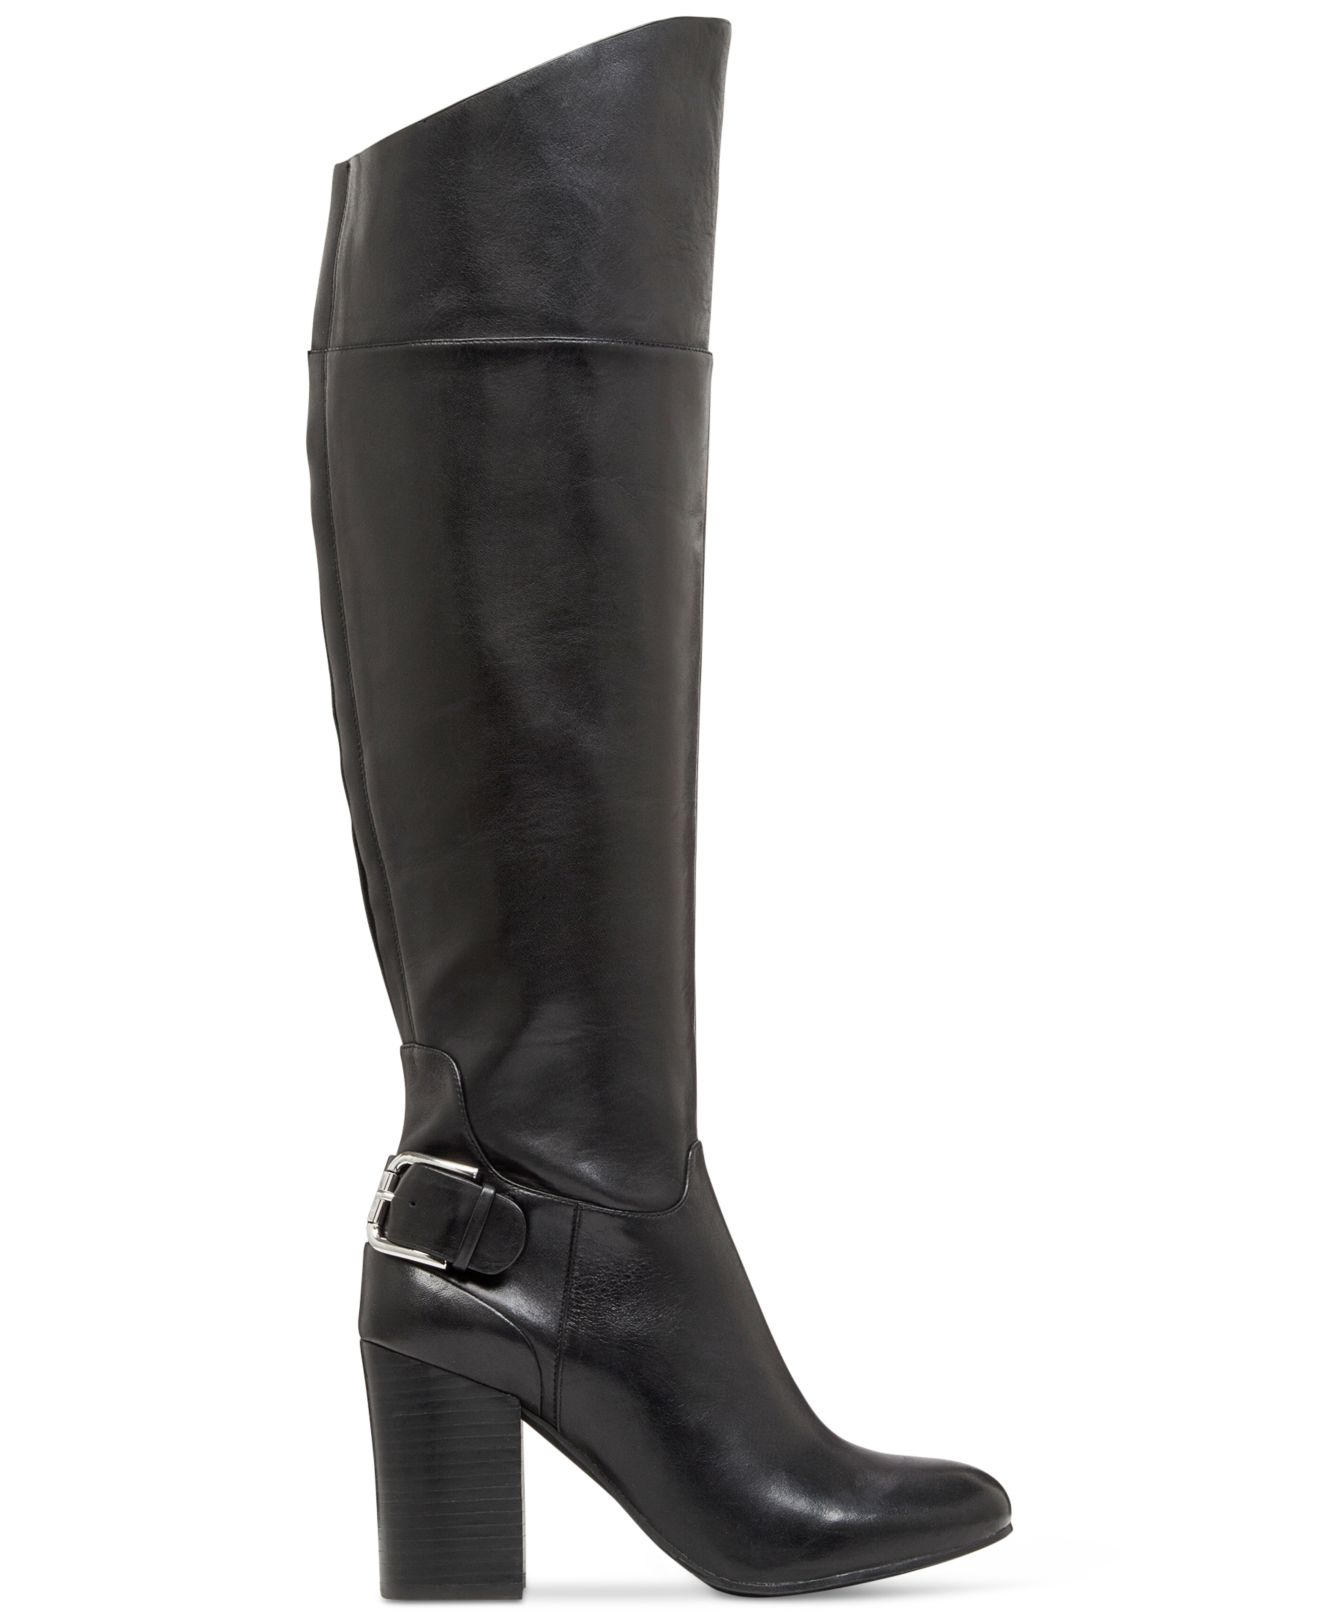 Lyst - Vince Camuto Sidney Tall Boots in Black